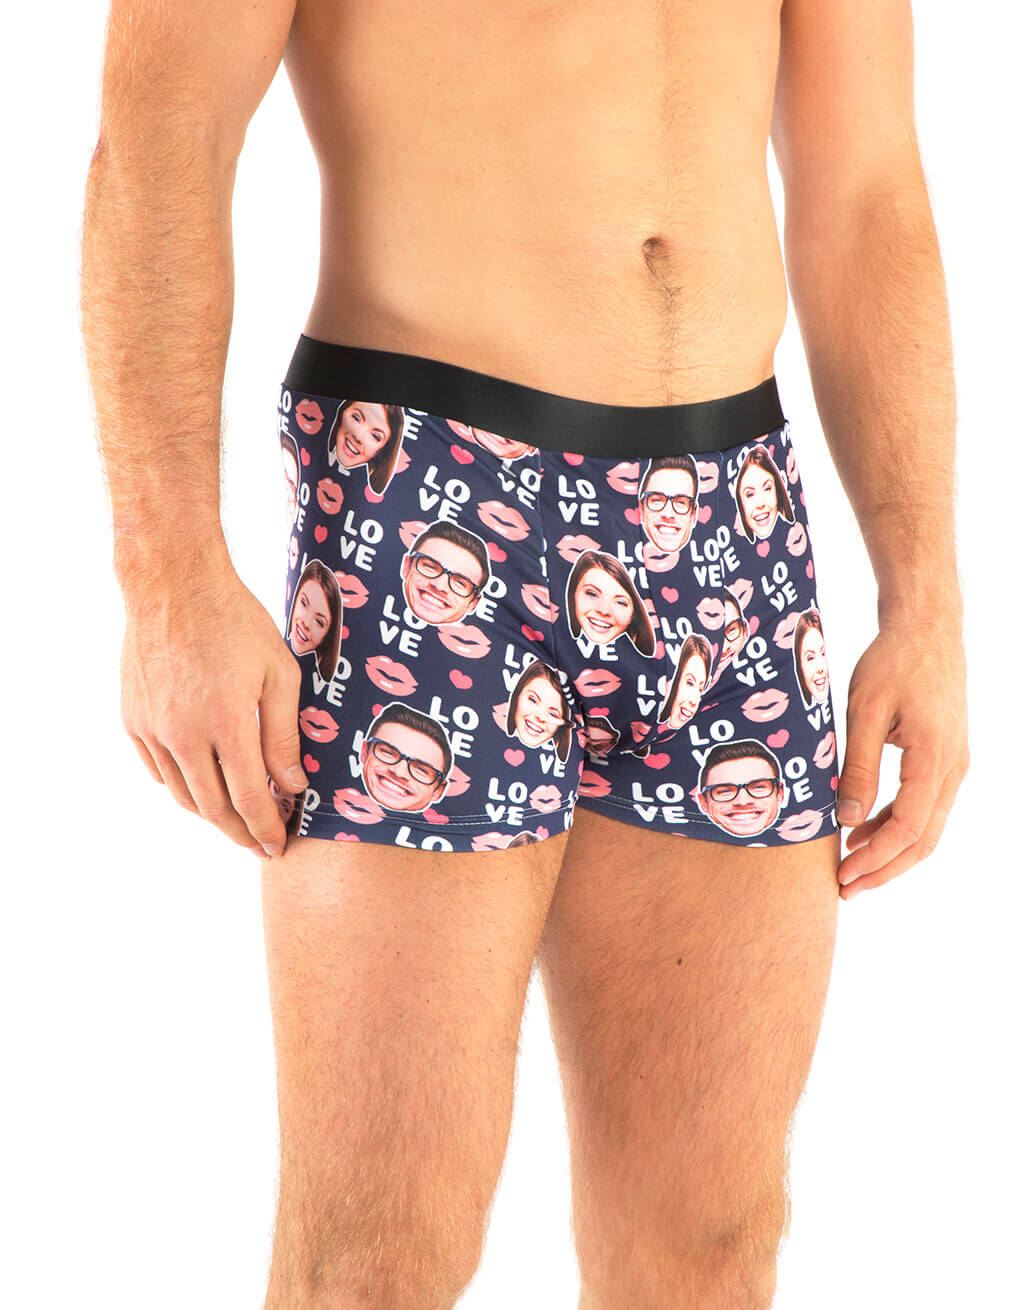 Valentines Boxers/sweetheart Face Boxer Shorts/mens Photo Boxers